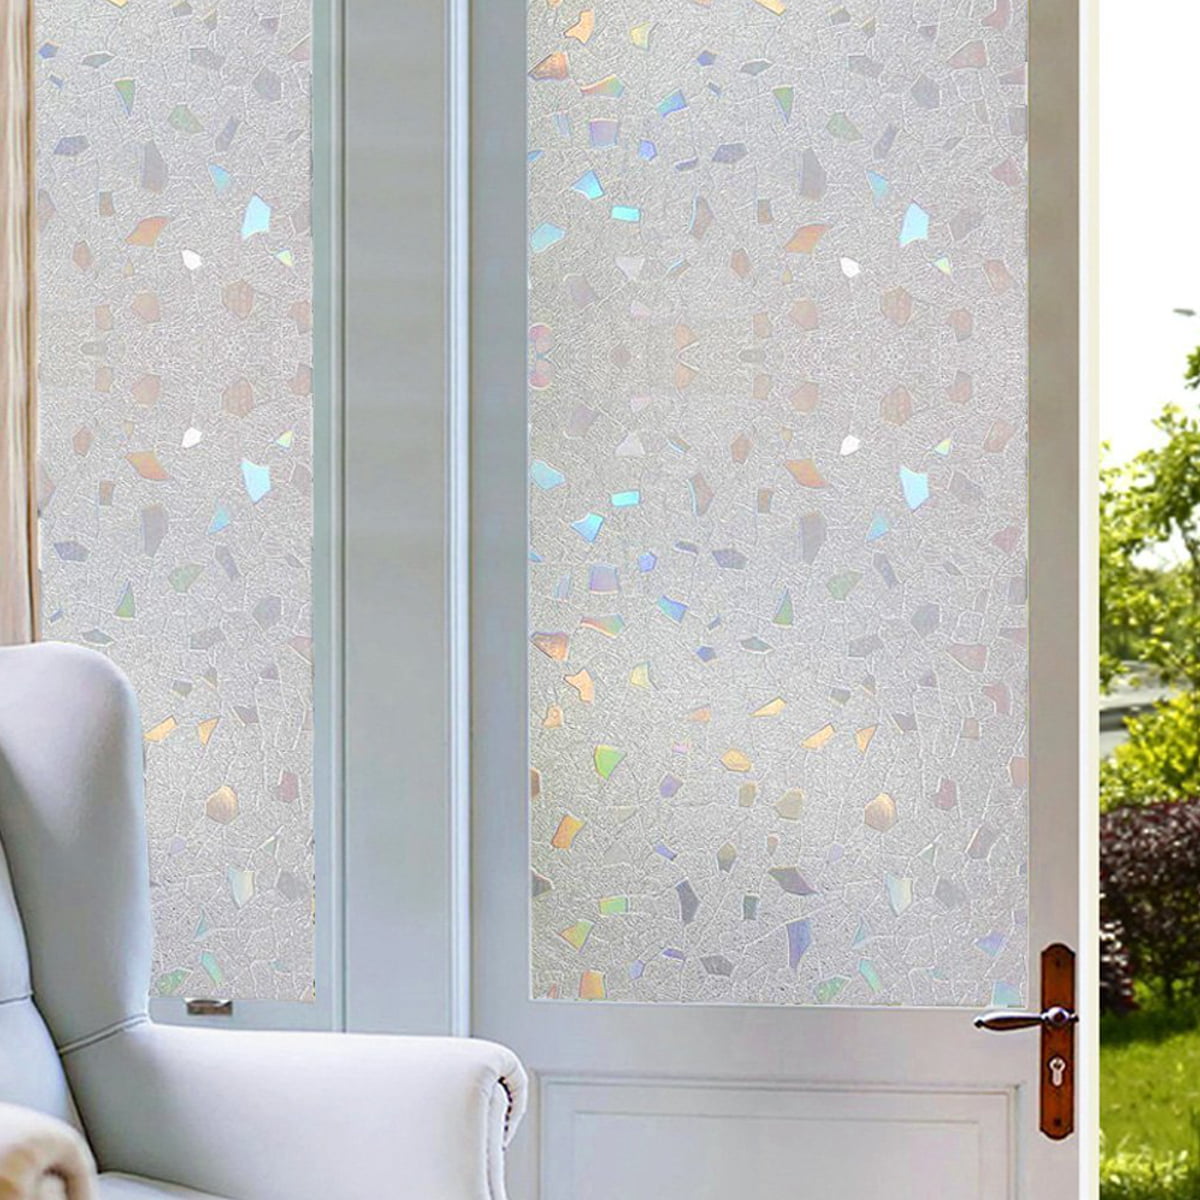 Frosted Privacy Window Film Home Bedroom  Bathroom Window Glass Security Sticker 